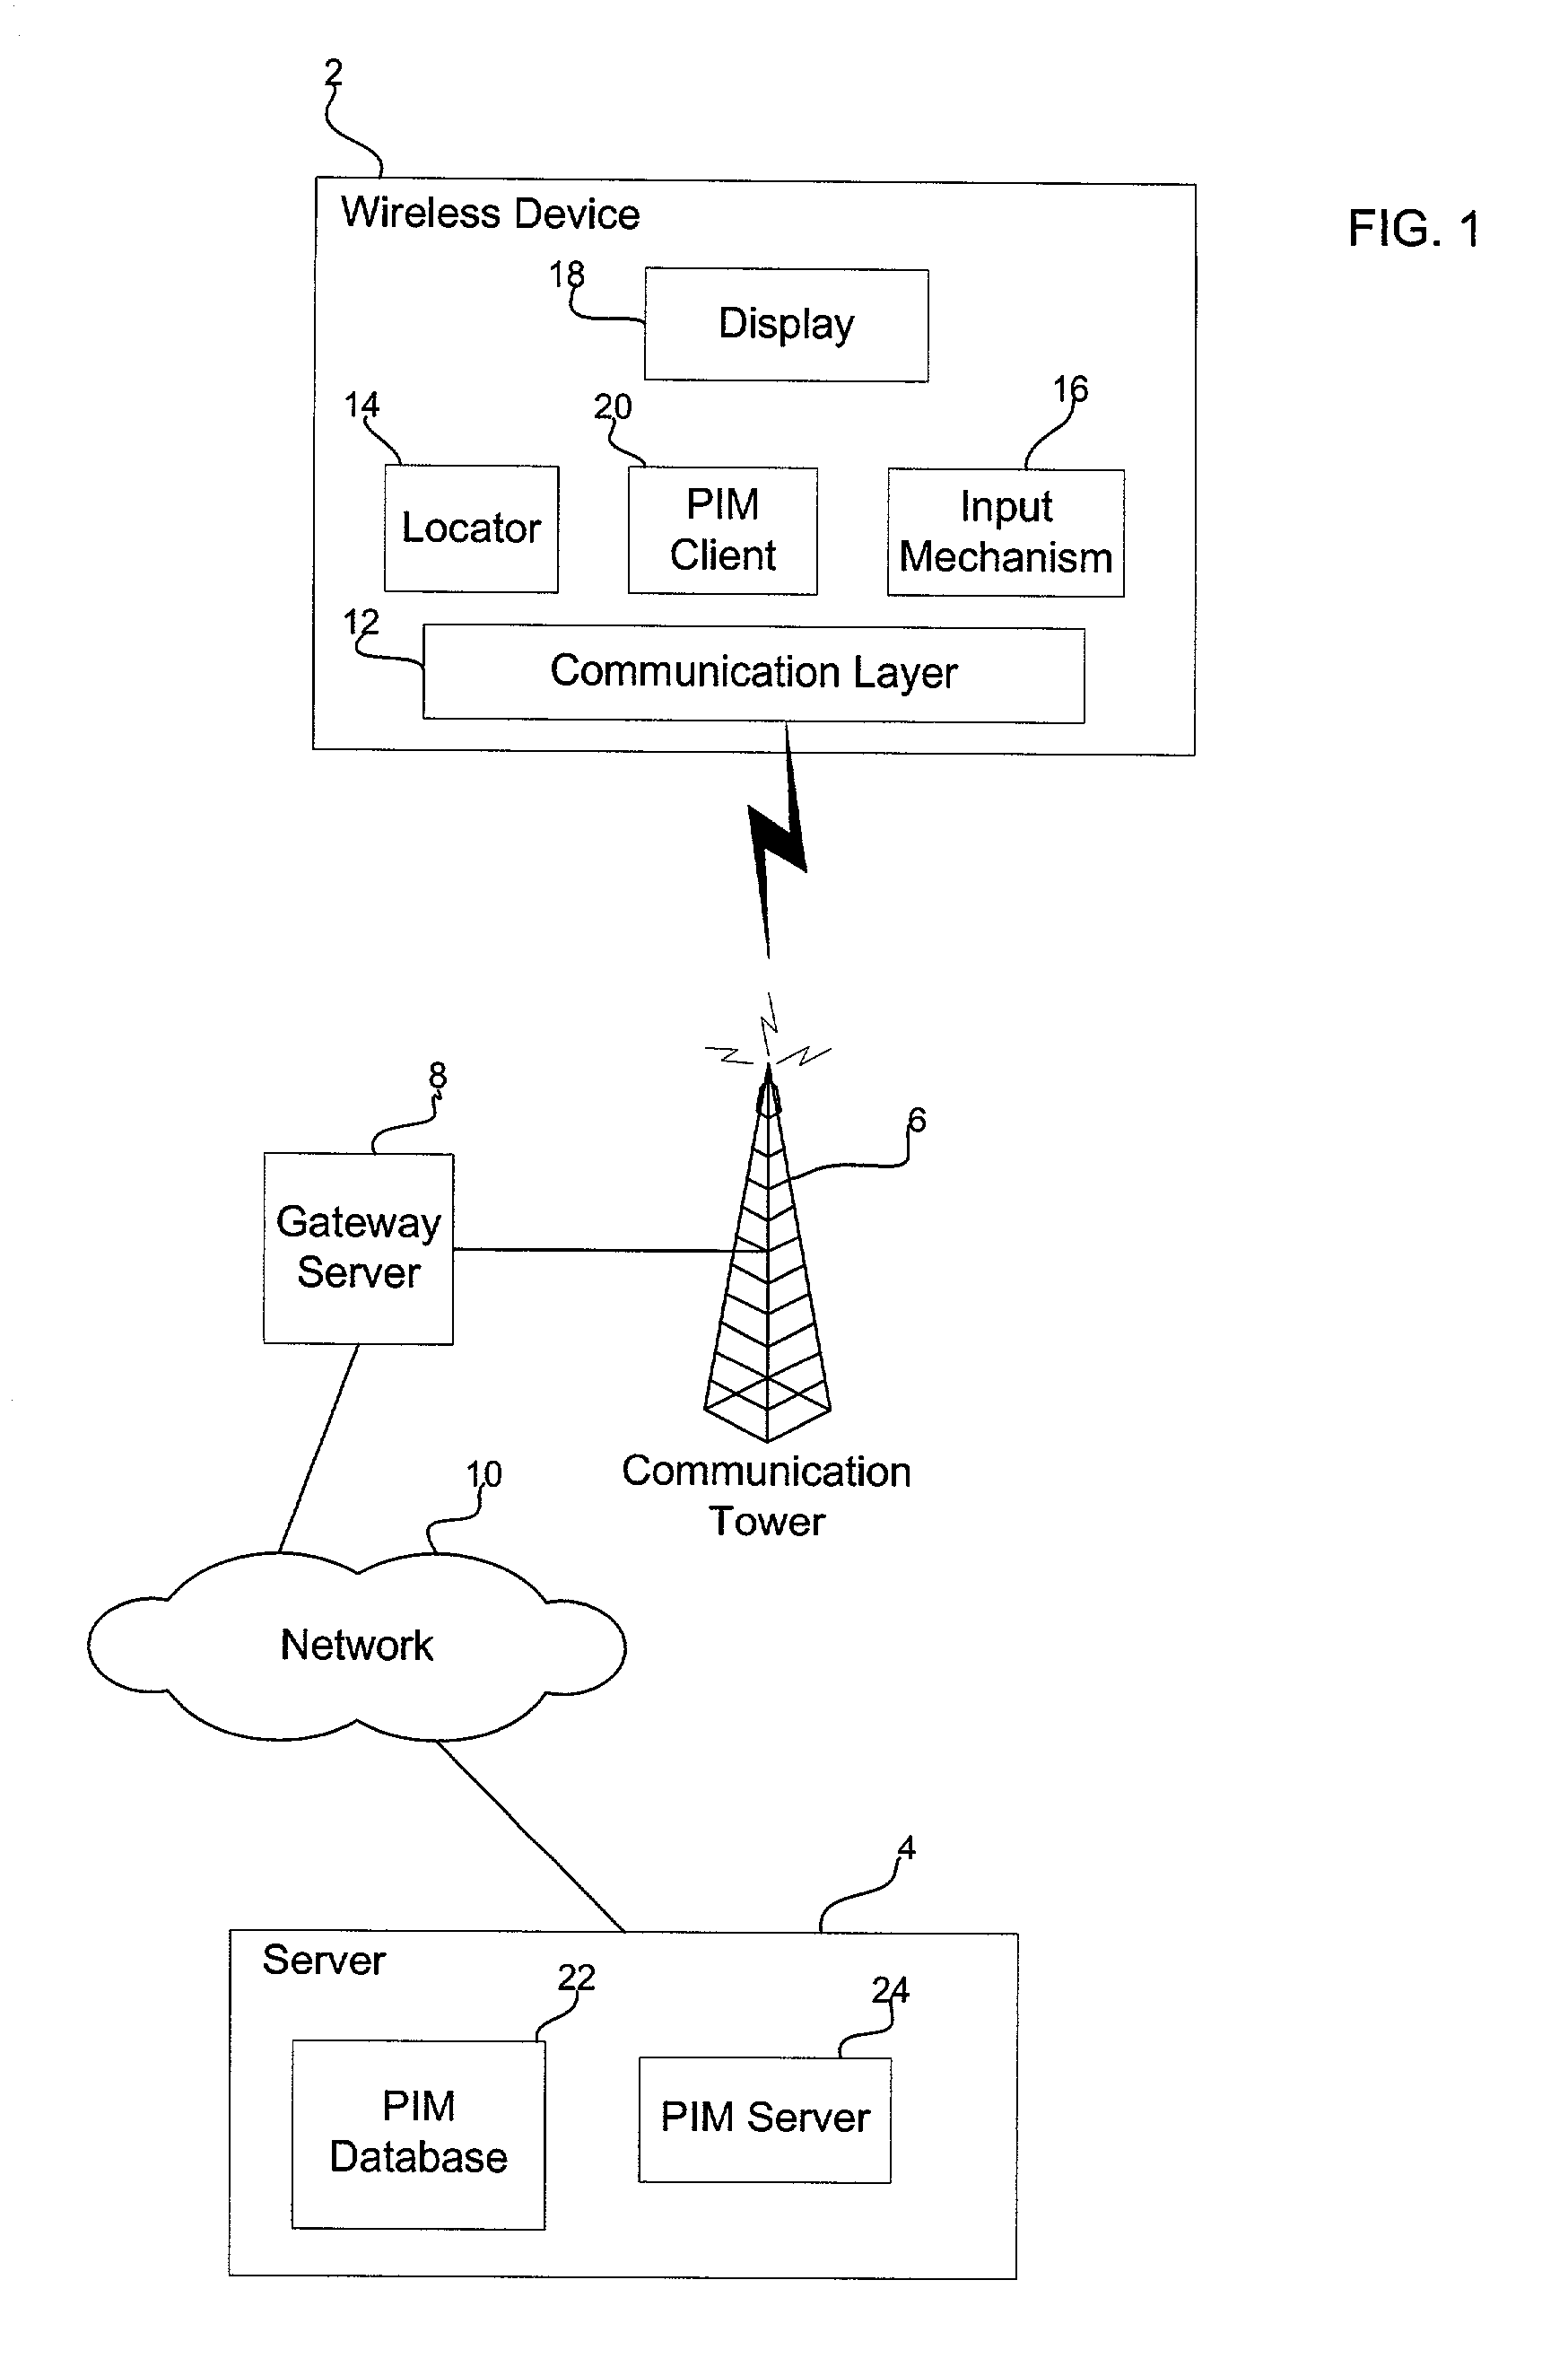 Method, system, and program for providing information on users of wireless devices in a database to a personal information manager